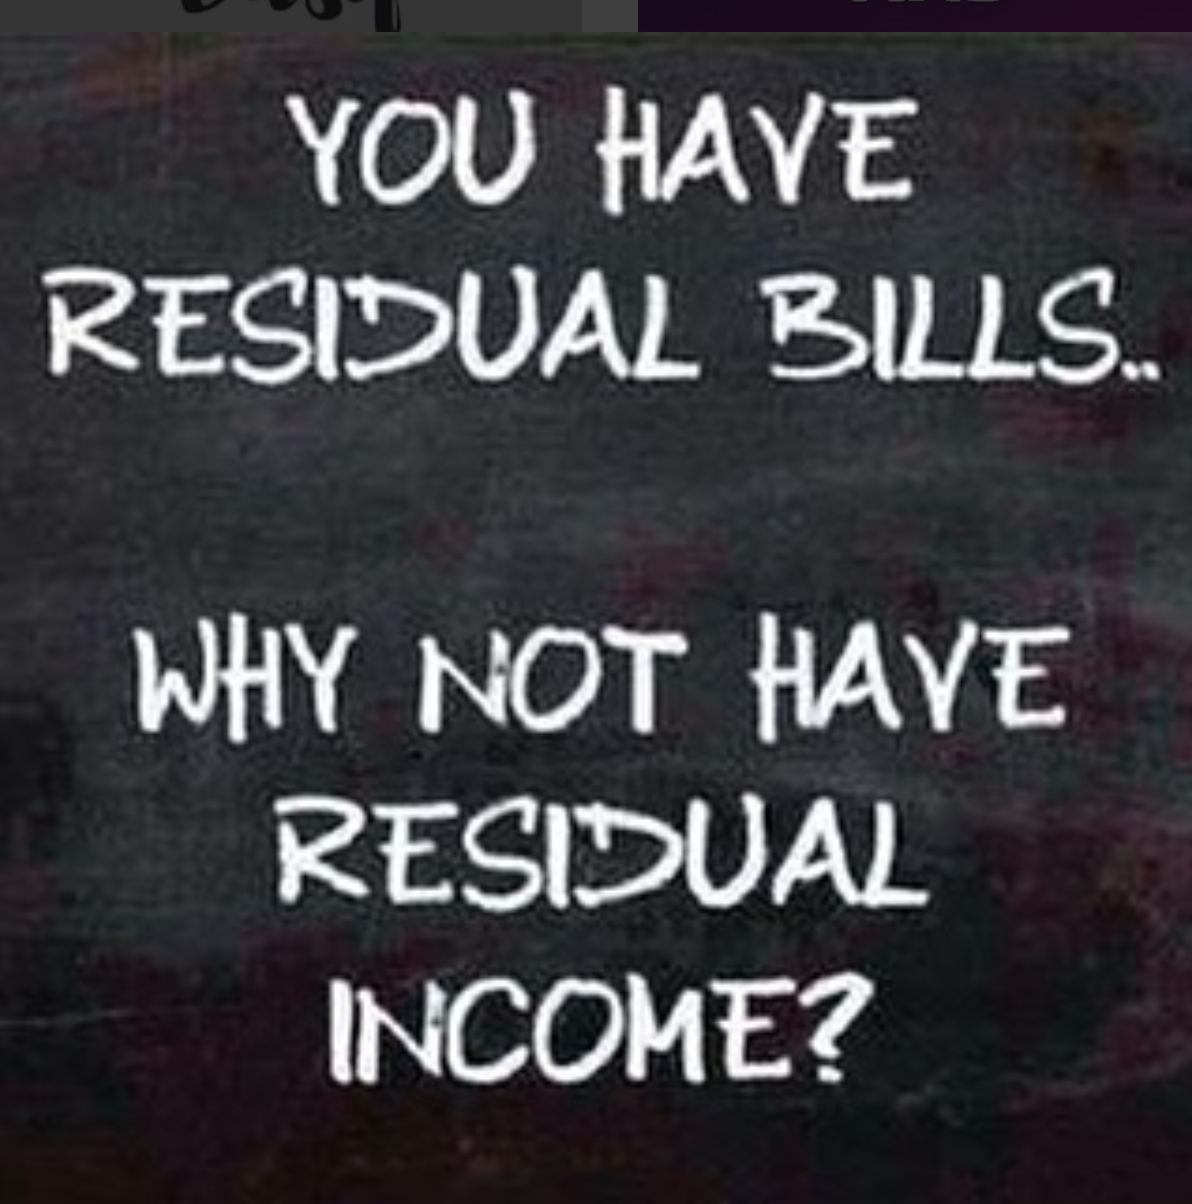 VA Residual Income Chart Shows How Much You Need to be VA Eligible